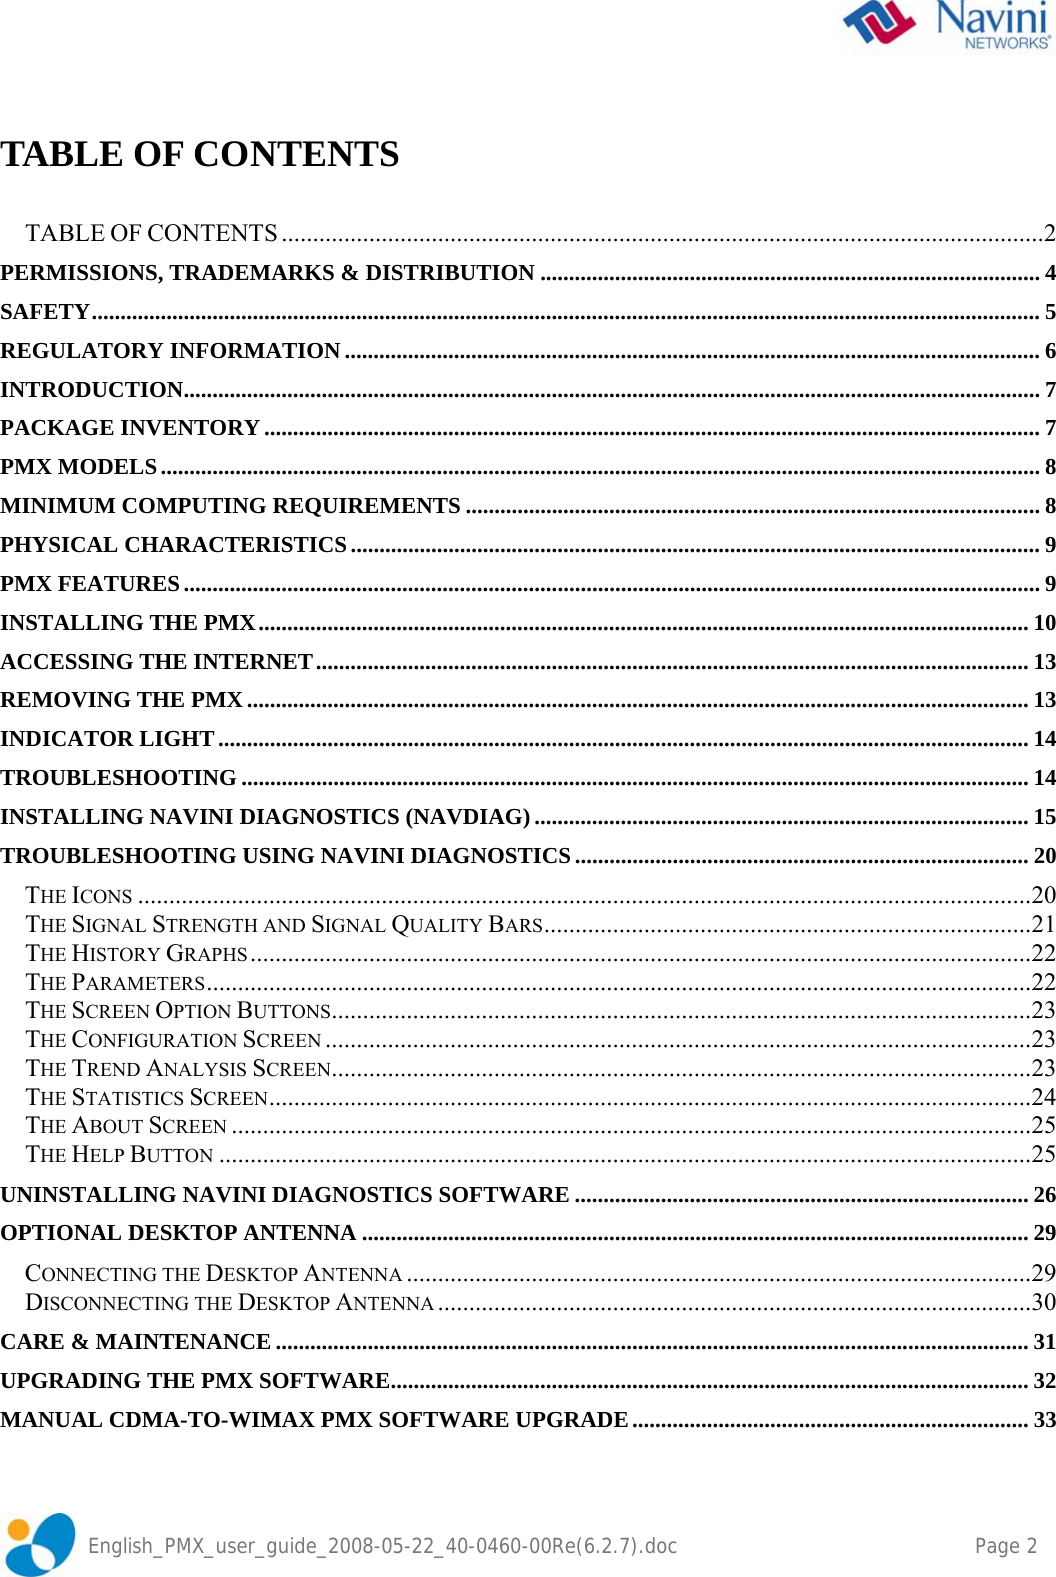    English_PMX_user_guide_2008-05-22_40-0460-00Re(6.2.7).doc    Page 2  TABLE OF CONTENTS  TABLE OF CONTENTS ..........................................................................................................................2 PERMISSIONS, TRADEMARKS &amp; DISTRIBUTION ....................................................................................... 4 SAFETY..................................................................................................................................................................... 5 REGULATORY INFORMATION ......................................................................................................................... 6 INTRODUCTION..................................................................................................................................................... 7 PACKAGE INVENTORY....................................................................................................................................... 7 PMX MODELS......................................................................................................................................................... 8 MINIMUM COMPUTING REQUIREMENTS .................................................................................................... 8 PHYSICAL CHARACTERISTICS........................................................................................................................ 9 PMX FEATURES..................................................................................................................................................... 9 INSTALLING THE PMX...................................................................................................................................... 10 ACCESSING THE INTERNET............................................................................................................................ 13 REMOVING THE PMX........................................................................................................................................ 13 INDICATOR LIGHT............................................................................................................................................. 14 TROUBLESHOOTING ......................................................................................................................................... 14 INSTALLING NAVINI DIAGNOSTICS (NAVDIAG) ...................................................................................... 15 TROUBLESHOOTING USING NAVINI DIAGNOSTICS ............................................................................... 20 THE ICONS ...............................................................................................................................................20 THE SIGNAL STRENGTH AND SIGNAL QUALITY BARS..............................................................................21 THE HISTORY GRAPHS .............................................................................................................................22 THE PARAMETERS....................................................................................................................................22 THE SCREEN OPTION BUTTONS................................................................................................................23 THE CONFIGURATION SCREEN .................................................................................................................23 THE TREND ANALYSIS SCREEN................................................................................................................23 THE STATISTICS SCREEN..........................................................................................................................24 THE ABOUT SCREEN ................................................................................................................................25 THE HELP BUTTON ..................................................................................................................................25 UNINSTALLING NAVINI DIAGNOSTICS SOFTWARE ............................................................................... 26 OPTIONAL DESKTOP ANTENNA .................................................................................................................... 29 CONNECTING THE DESKTOP ANTENNA ....................................................................................................29 DISCONNECTING THE DESKTOP ANTENNA ...............................................................................................30 CARE &amp; MAINTENANCE ................................................................................................................................... 31 UPGRADING THE PMX SOFTWARE............................................................................................................... 32 MANUAL CDMA-TO-WIMAX PMX SOFTWARE UPGRADE..................................................................... 33 